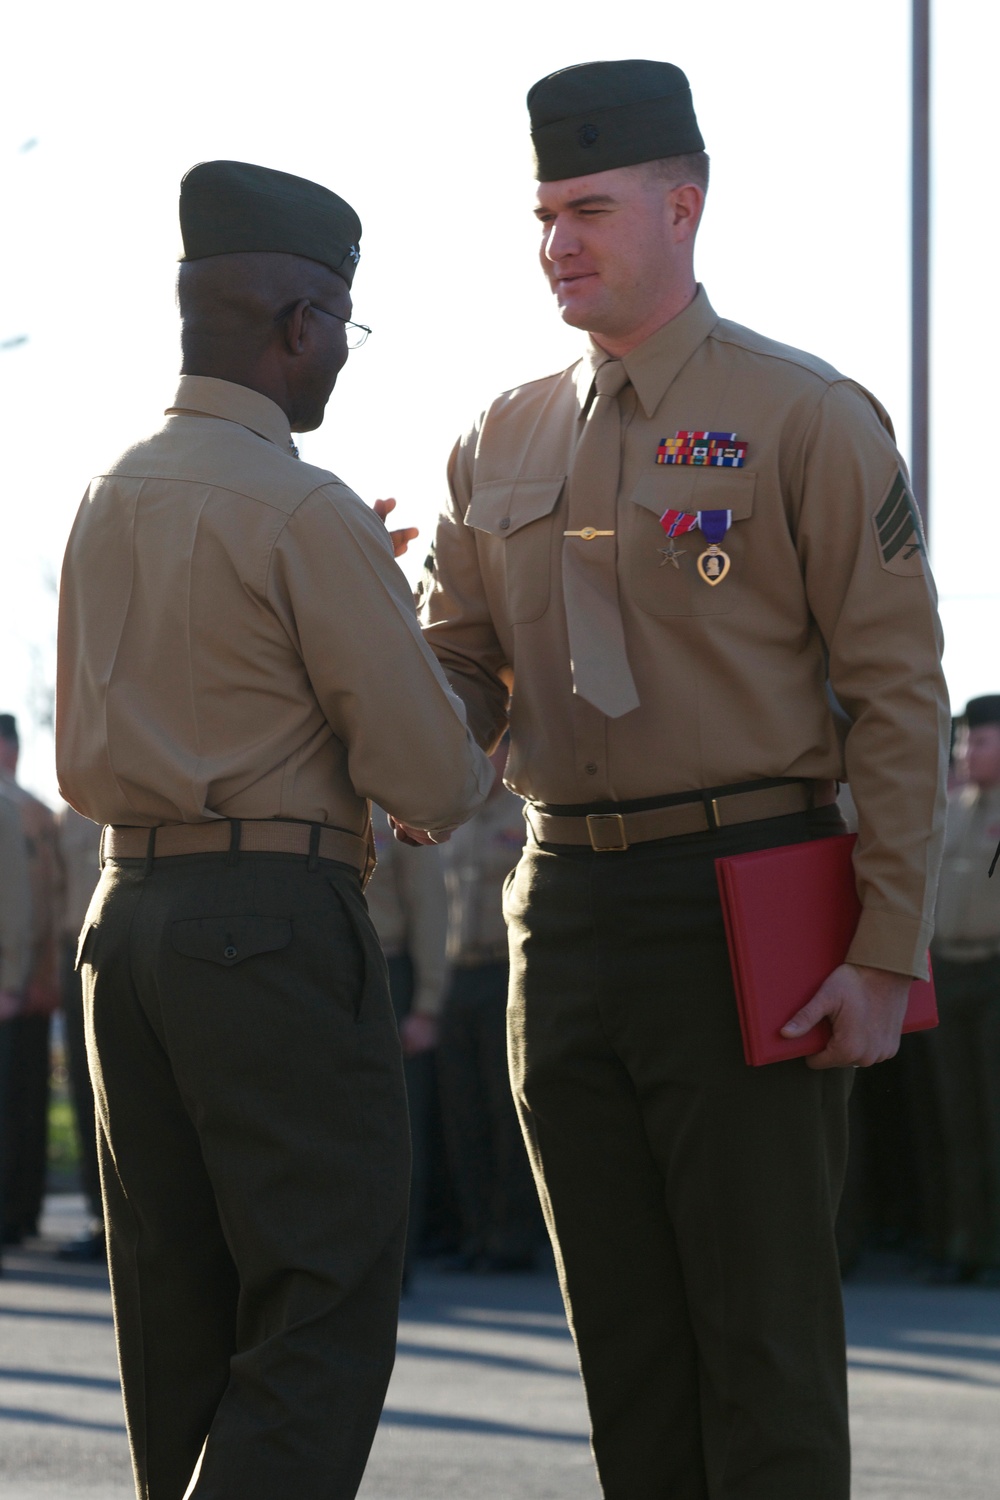 Two members of 1st Light Armored Reconnaissance Battalion awarded Bronze Star